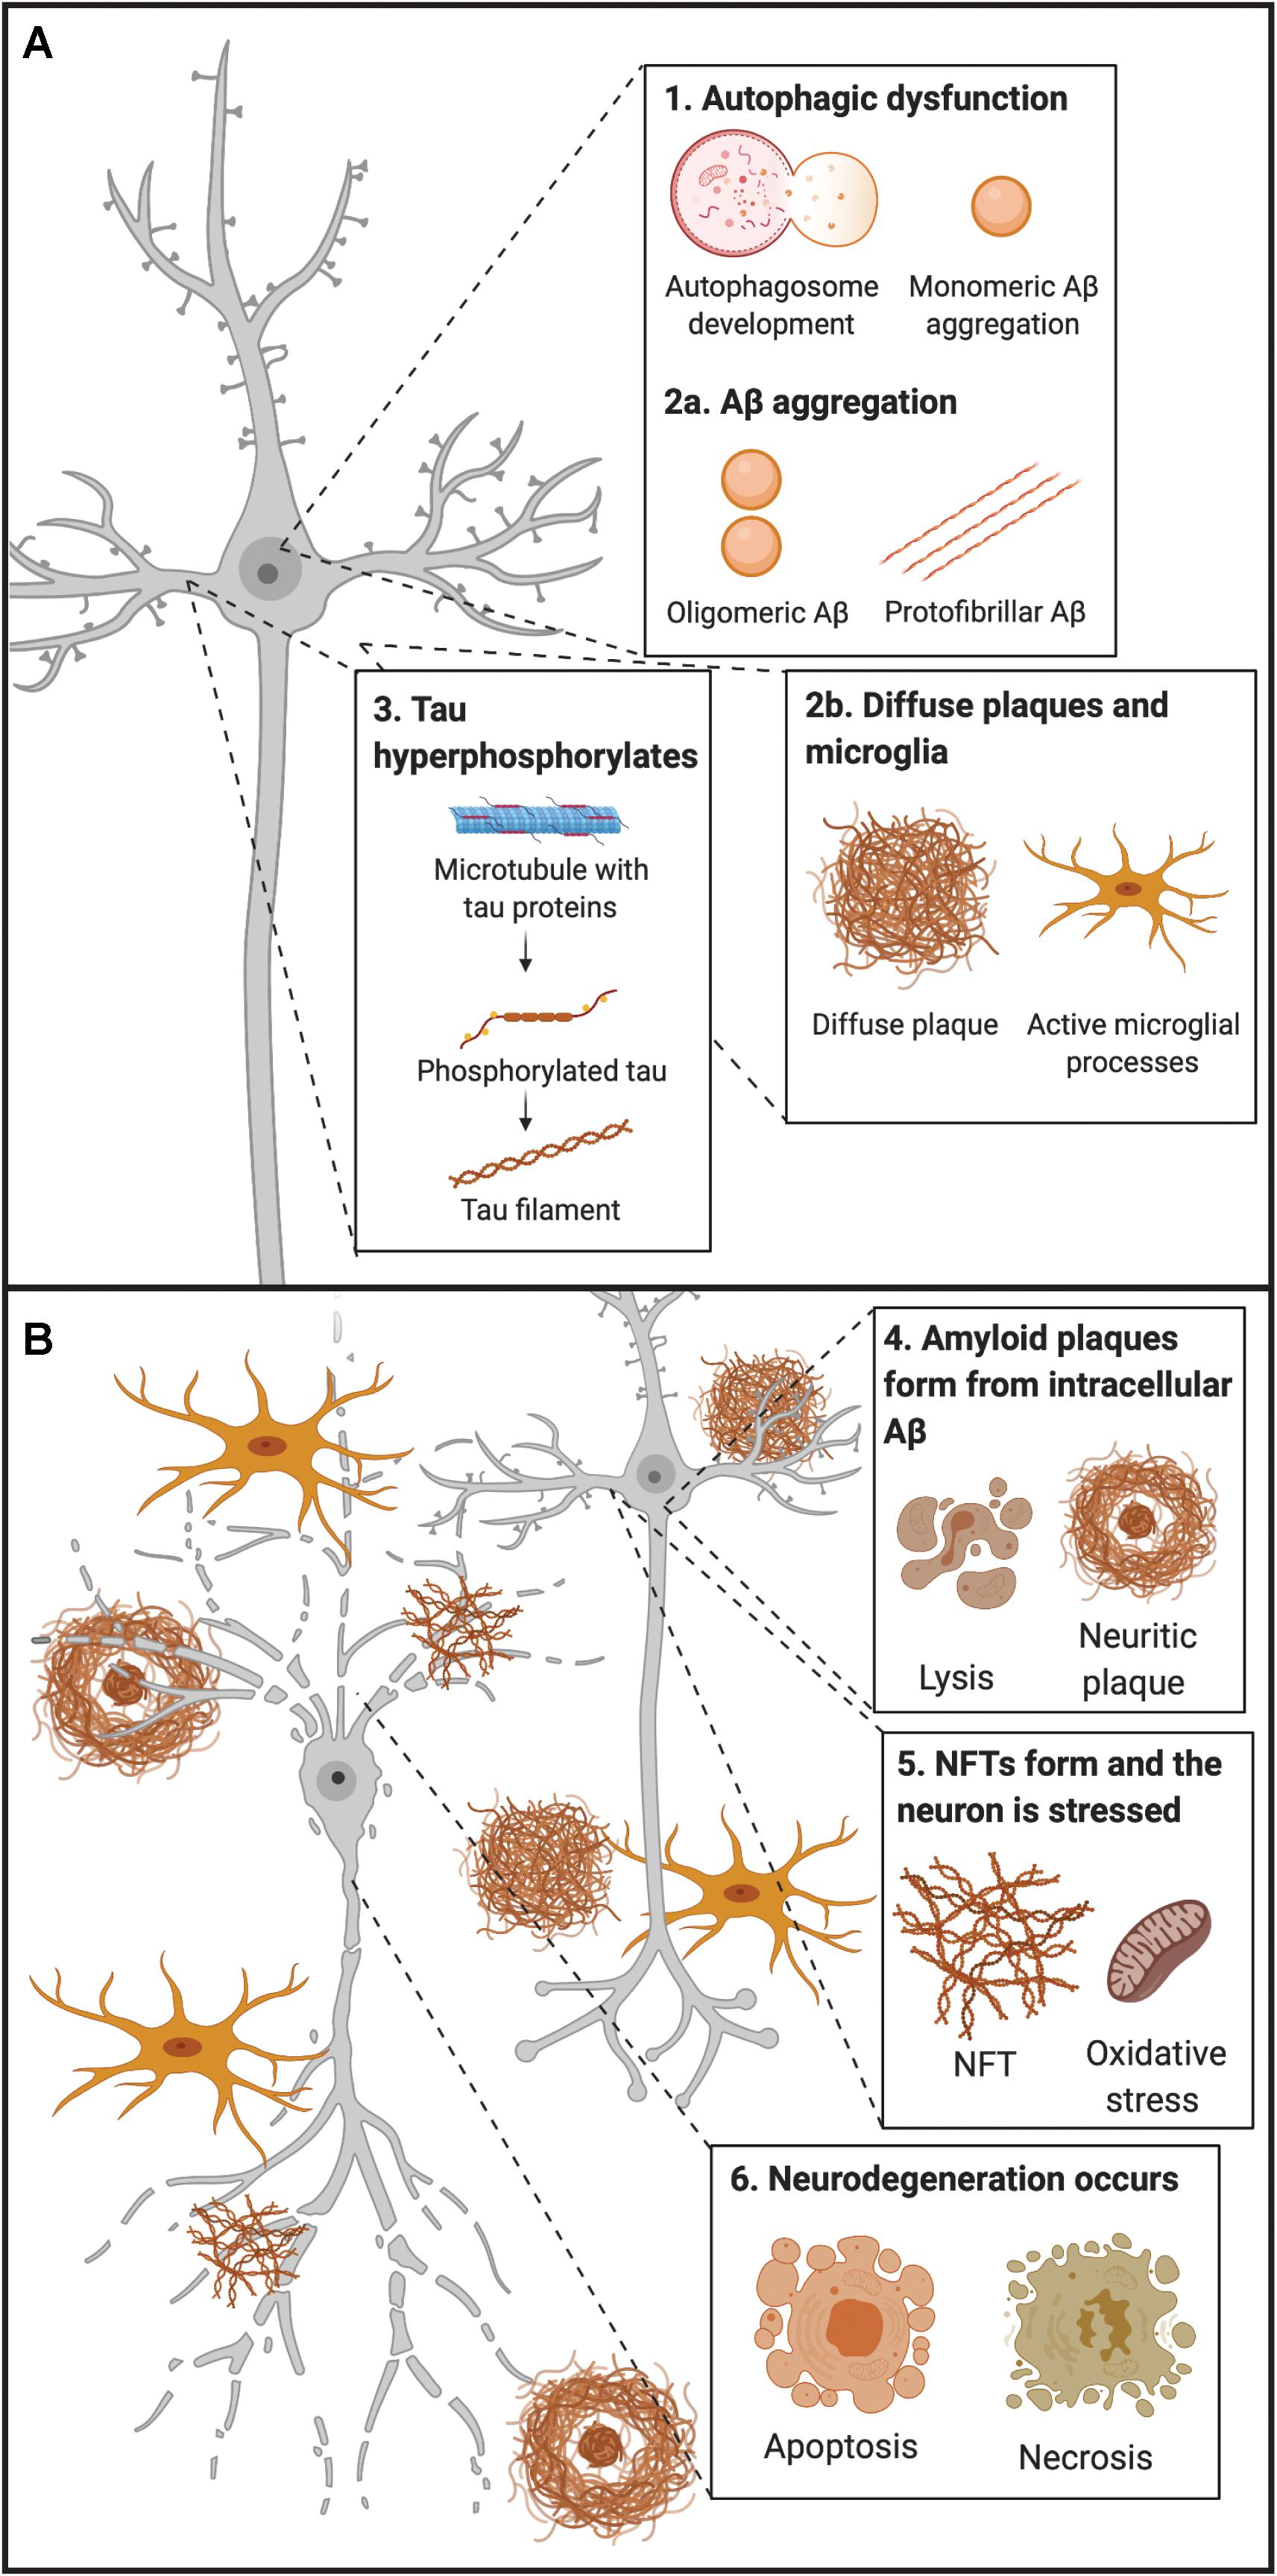 PDF) Blood Biomarkers of Alzheimer's Disease and Cognition: A Literature  Review.